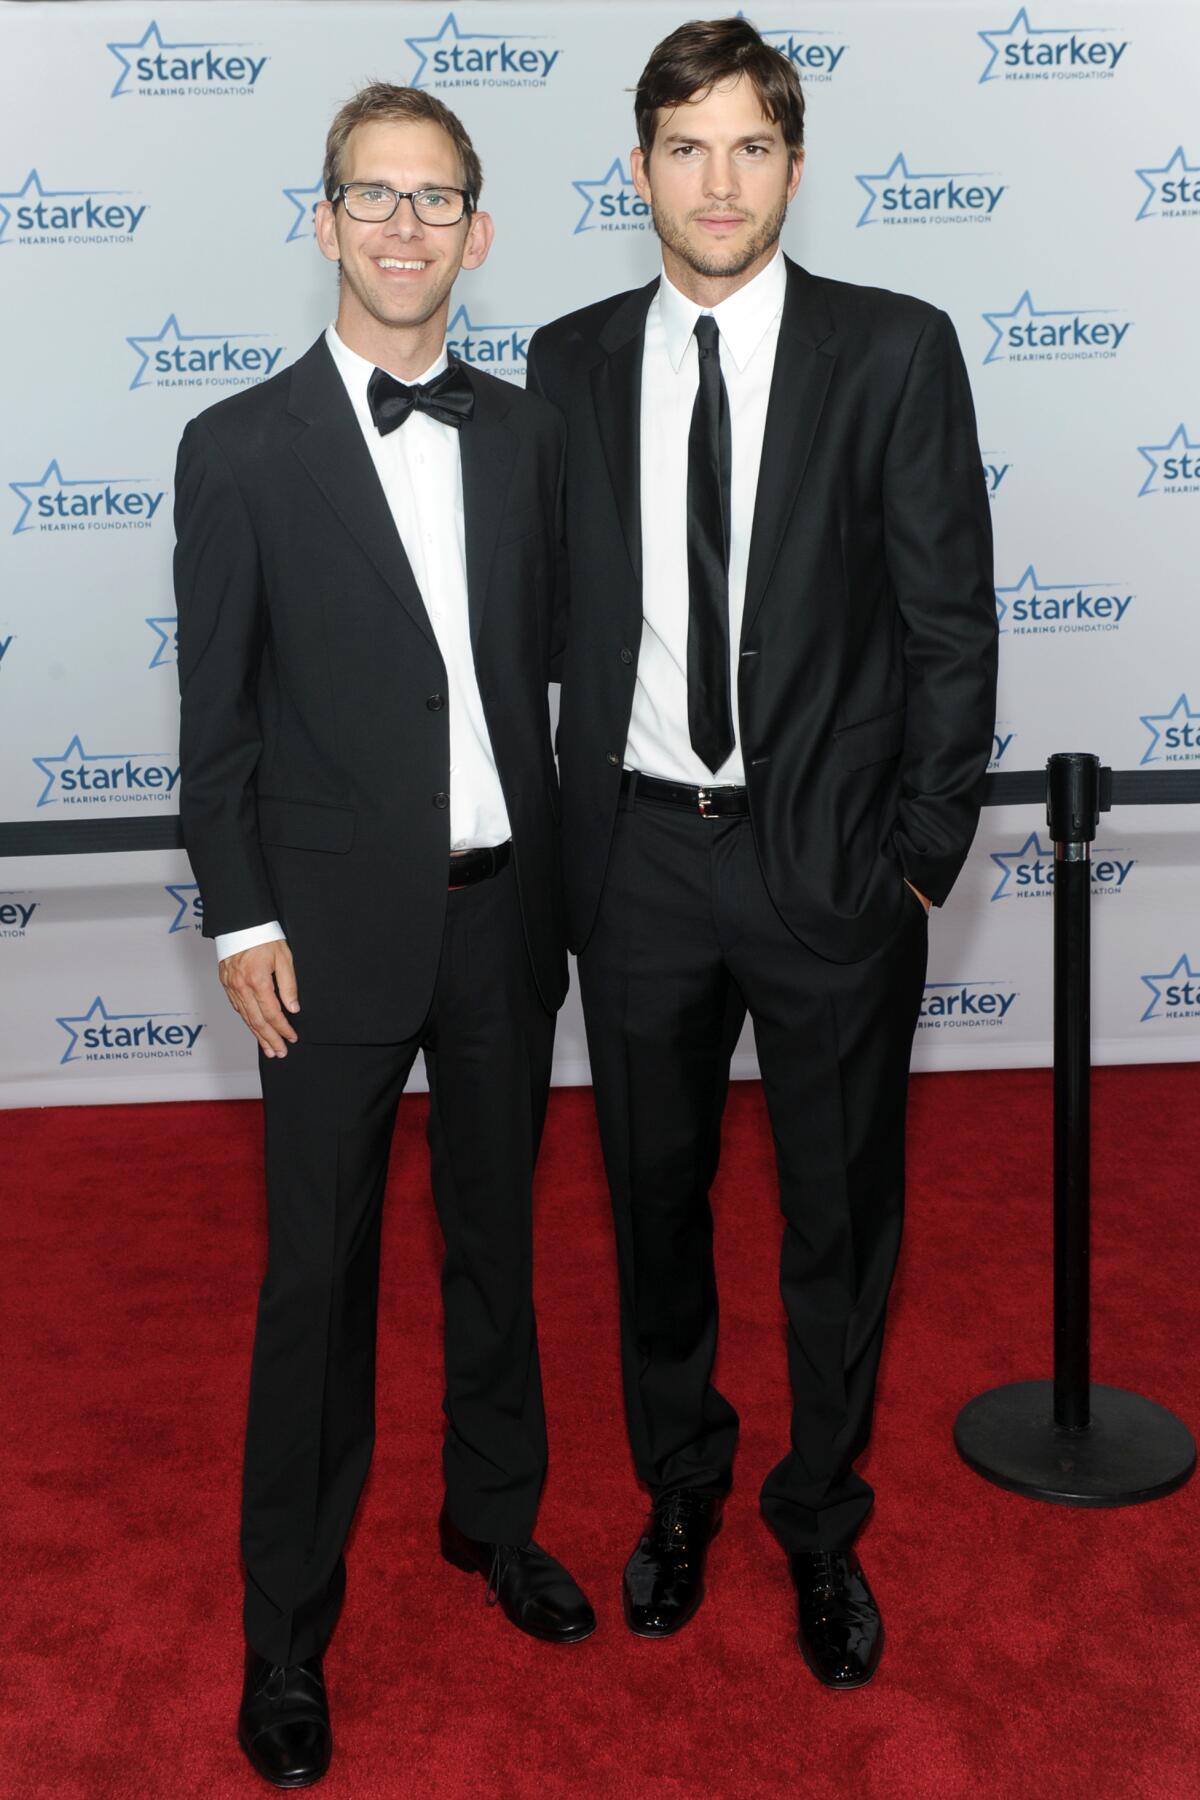 Fraternal twin brothers pose on a red carpet in tuxedos